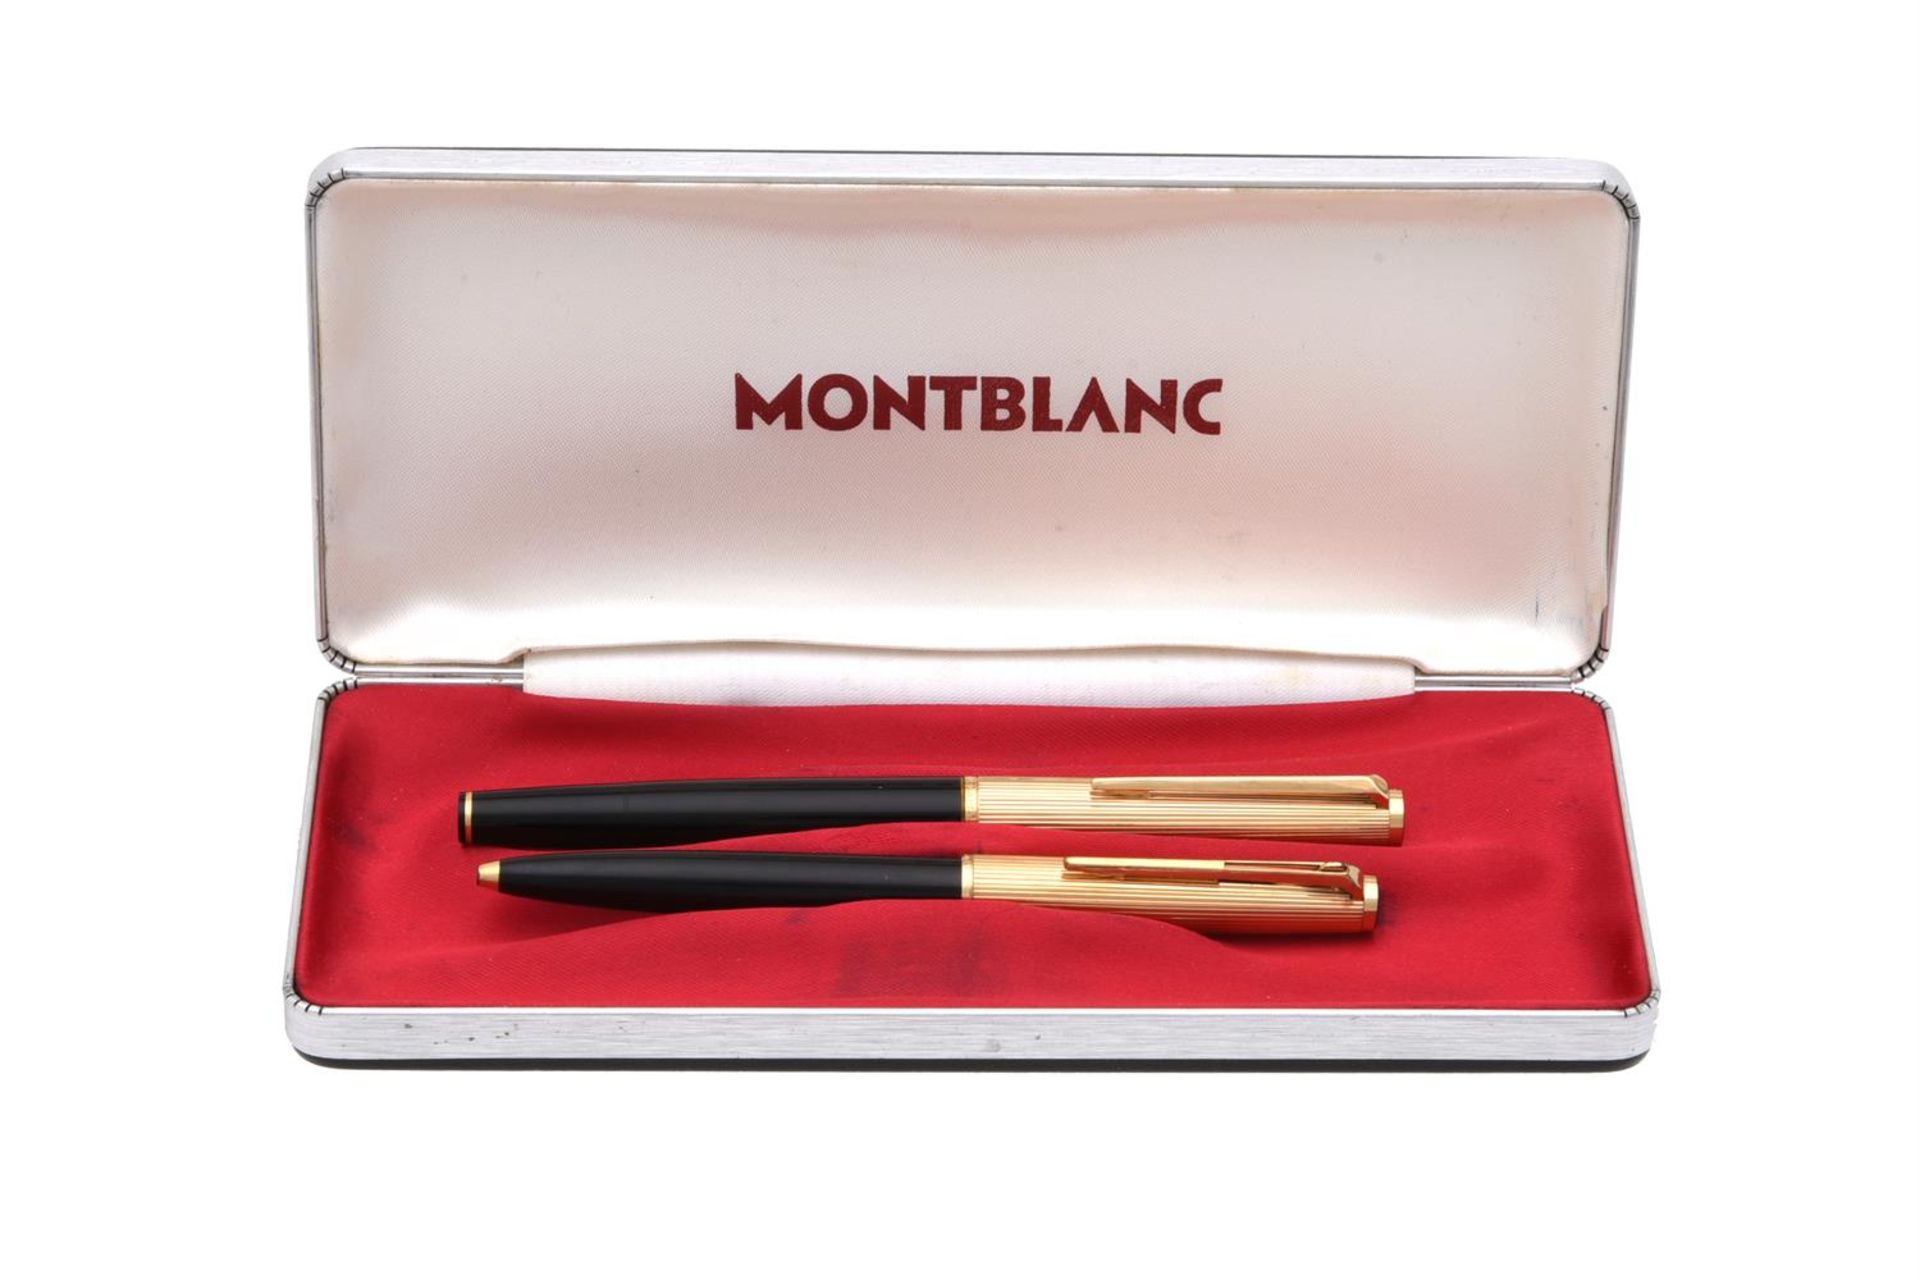 MONTBLANC, A BLACK FOUNTAIN PEN AND BALLPOINT PEN - Image 3 of 3